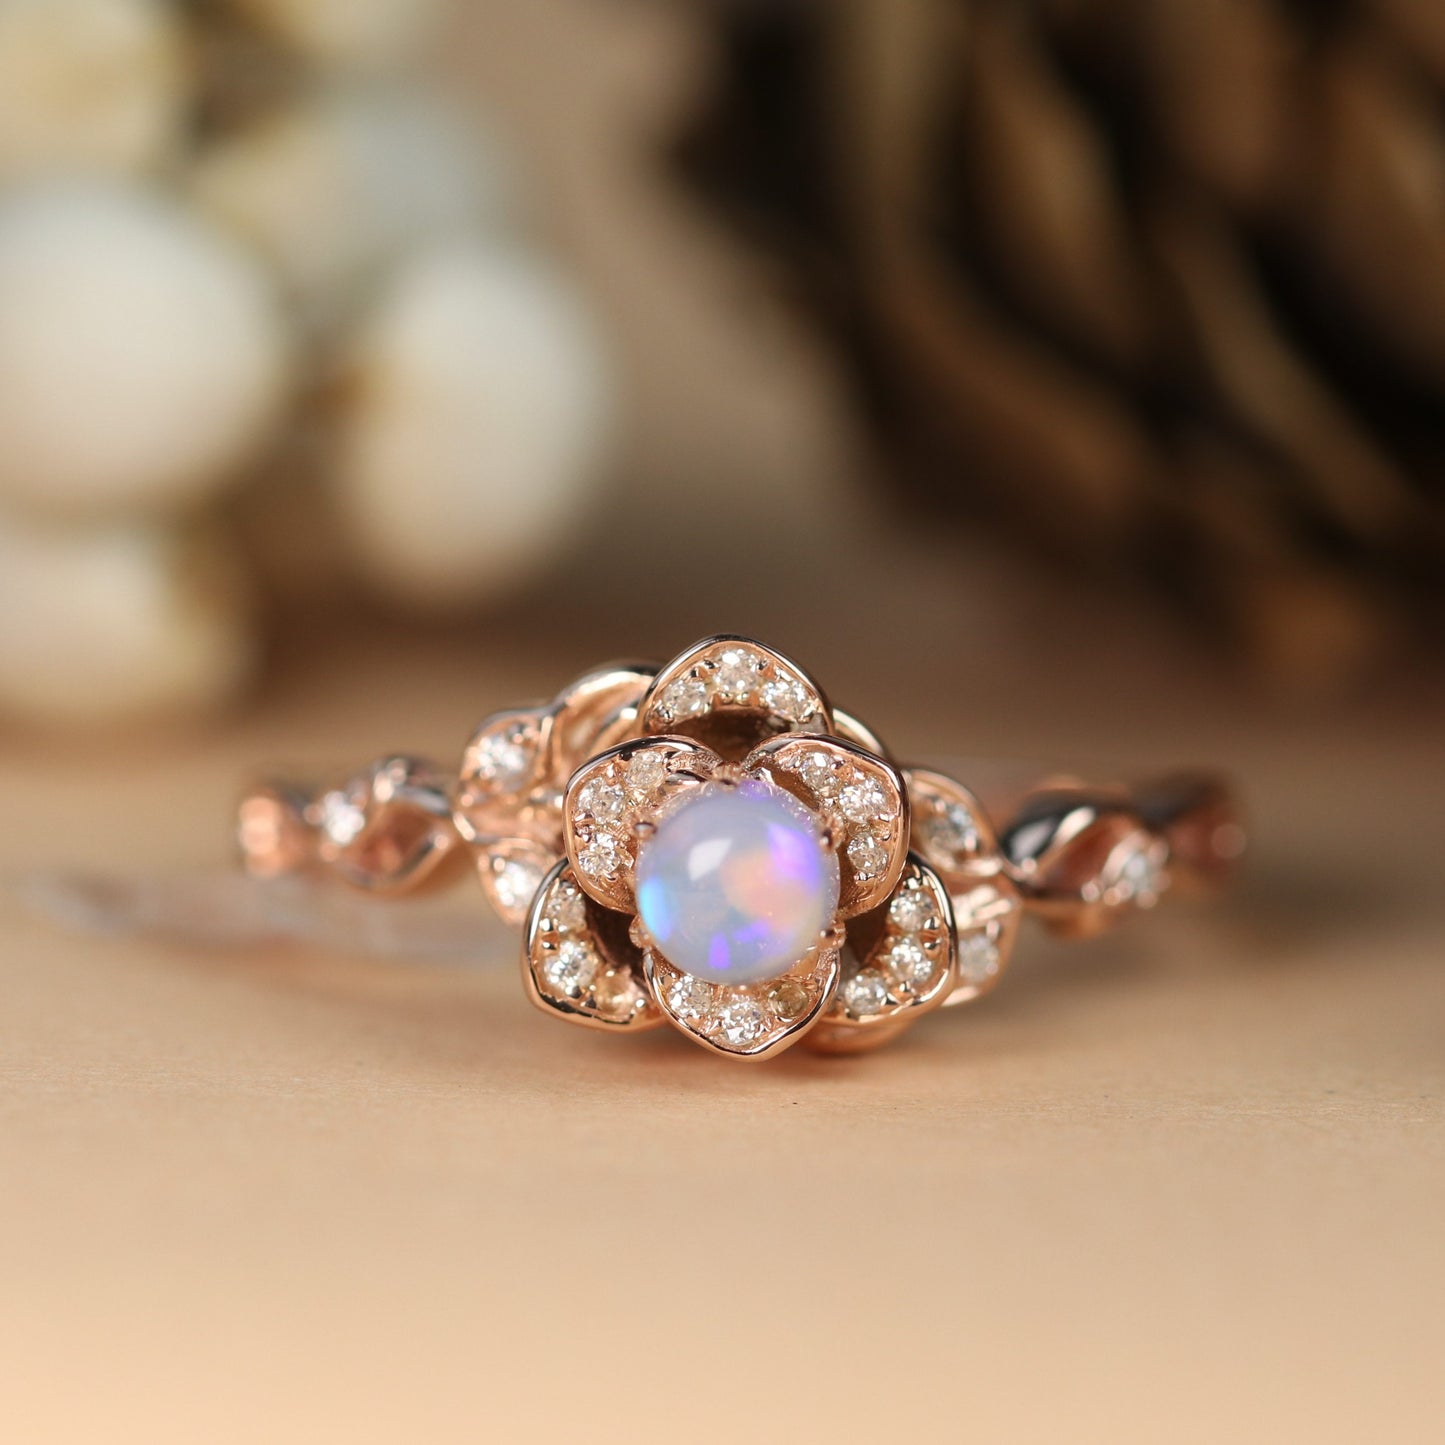 New 0.75 Carat Round Cut Fire Opal Rose Flower Wedding Ring for Women in Gold